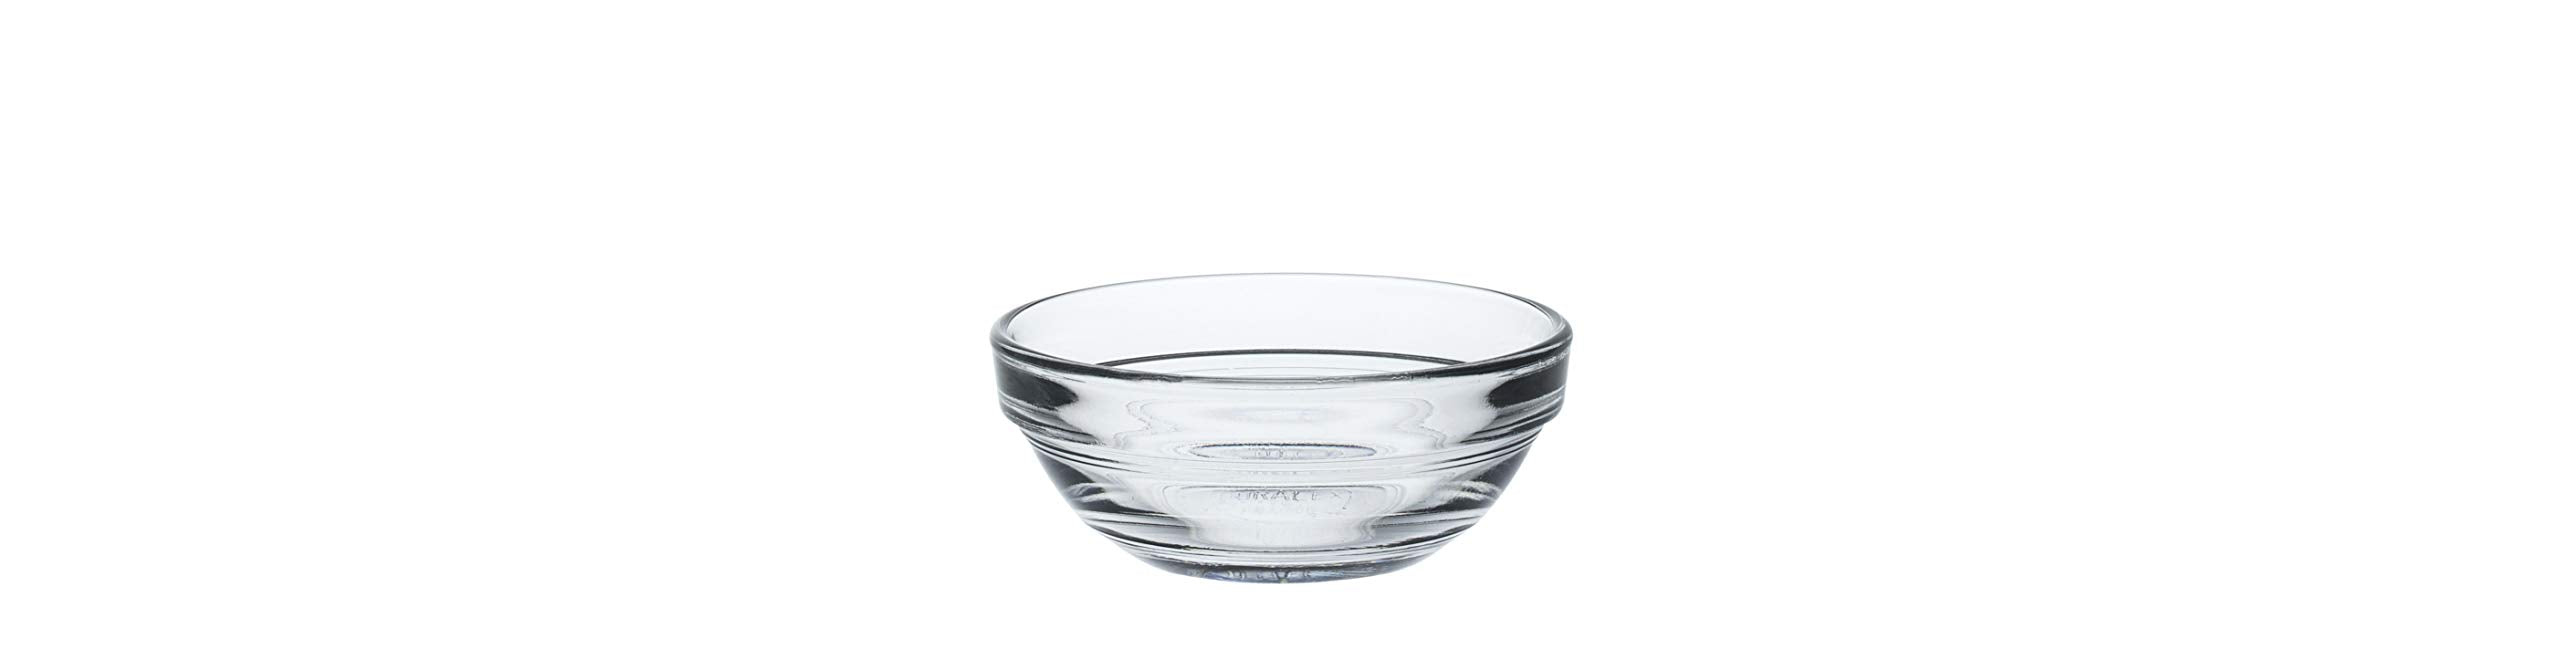 Duralex Lily Round Stacking Mixing Glass Bowl 7.5 cm, Set of 4 2021AC04 by  - Like New